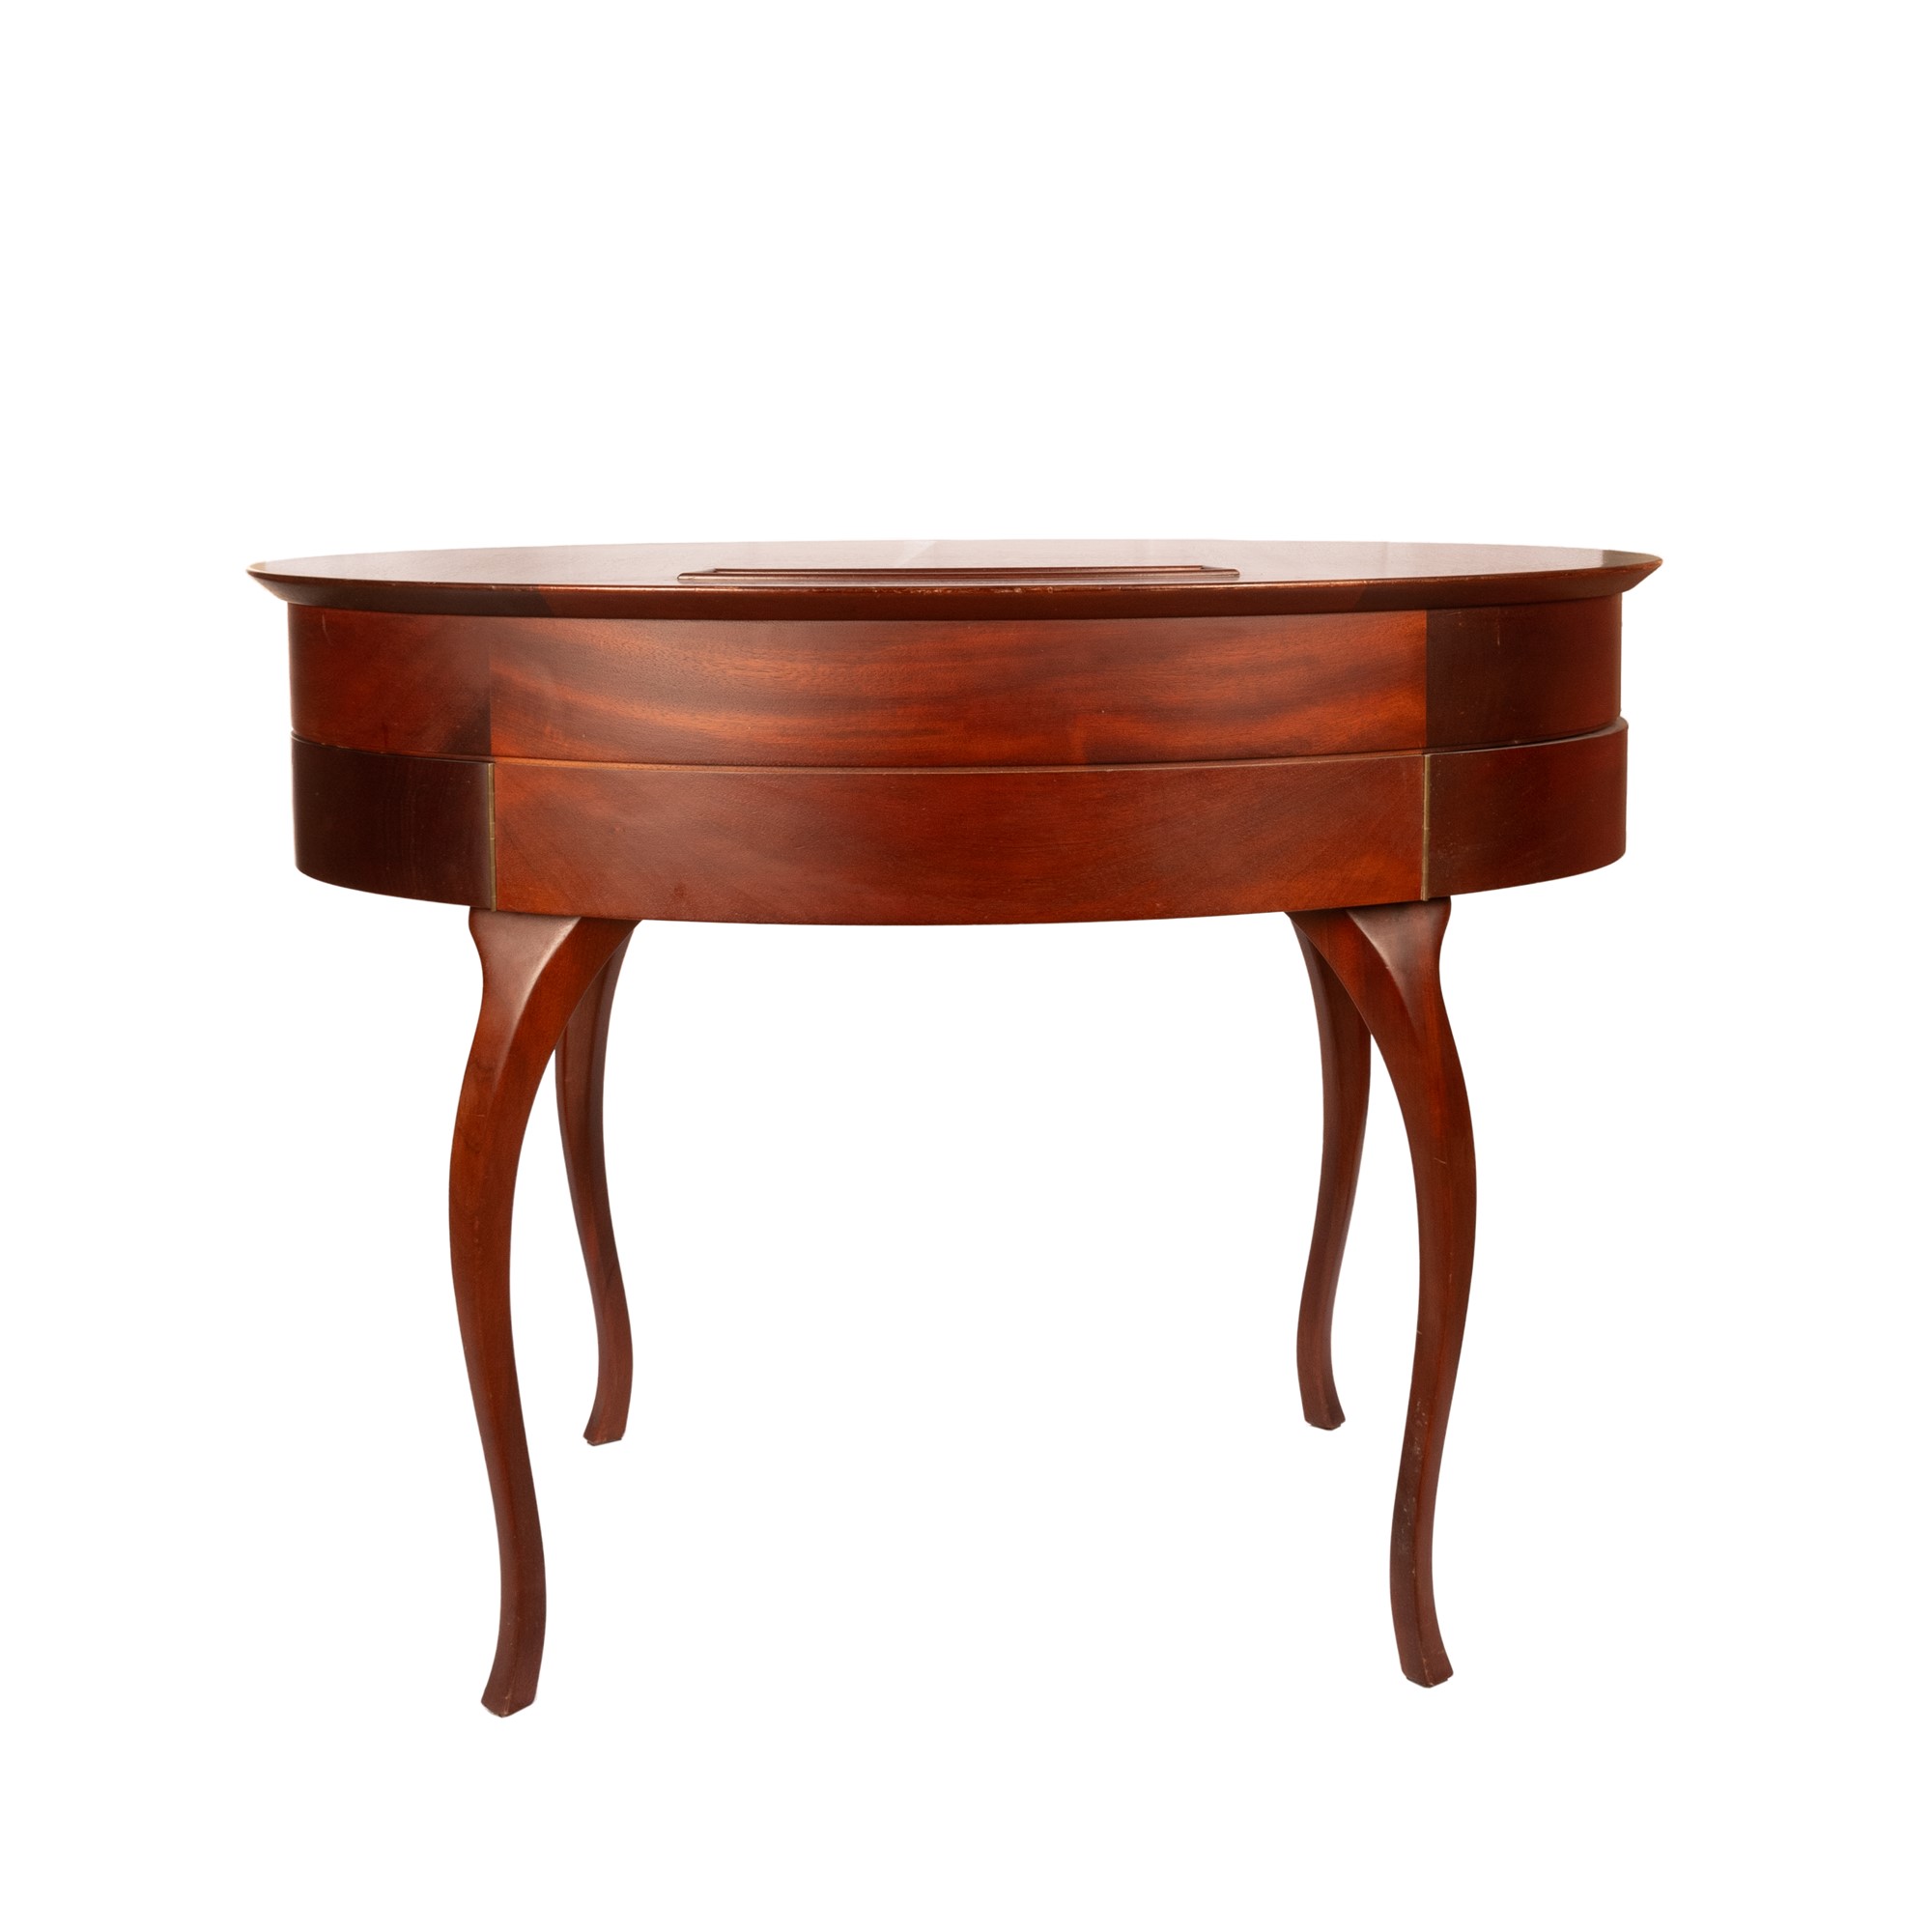 Writing desk in cherry wood - Image 25 of 25